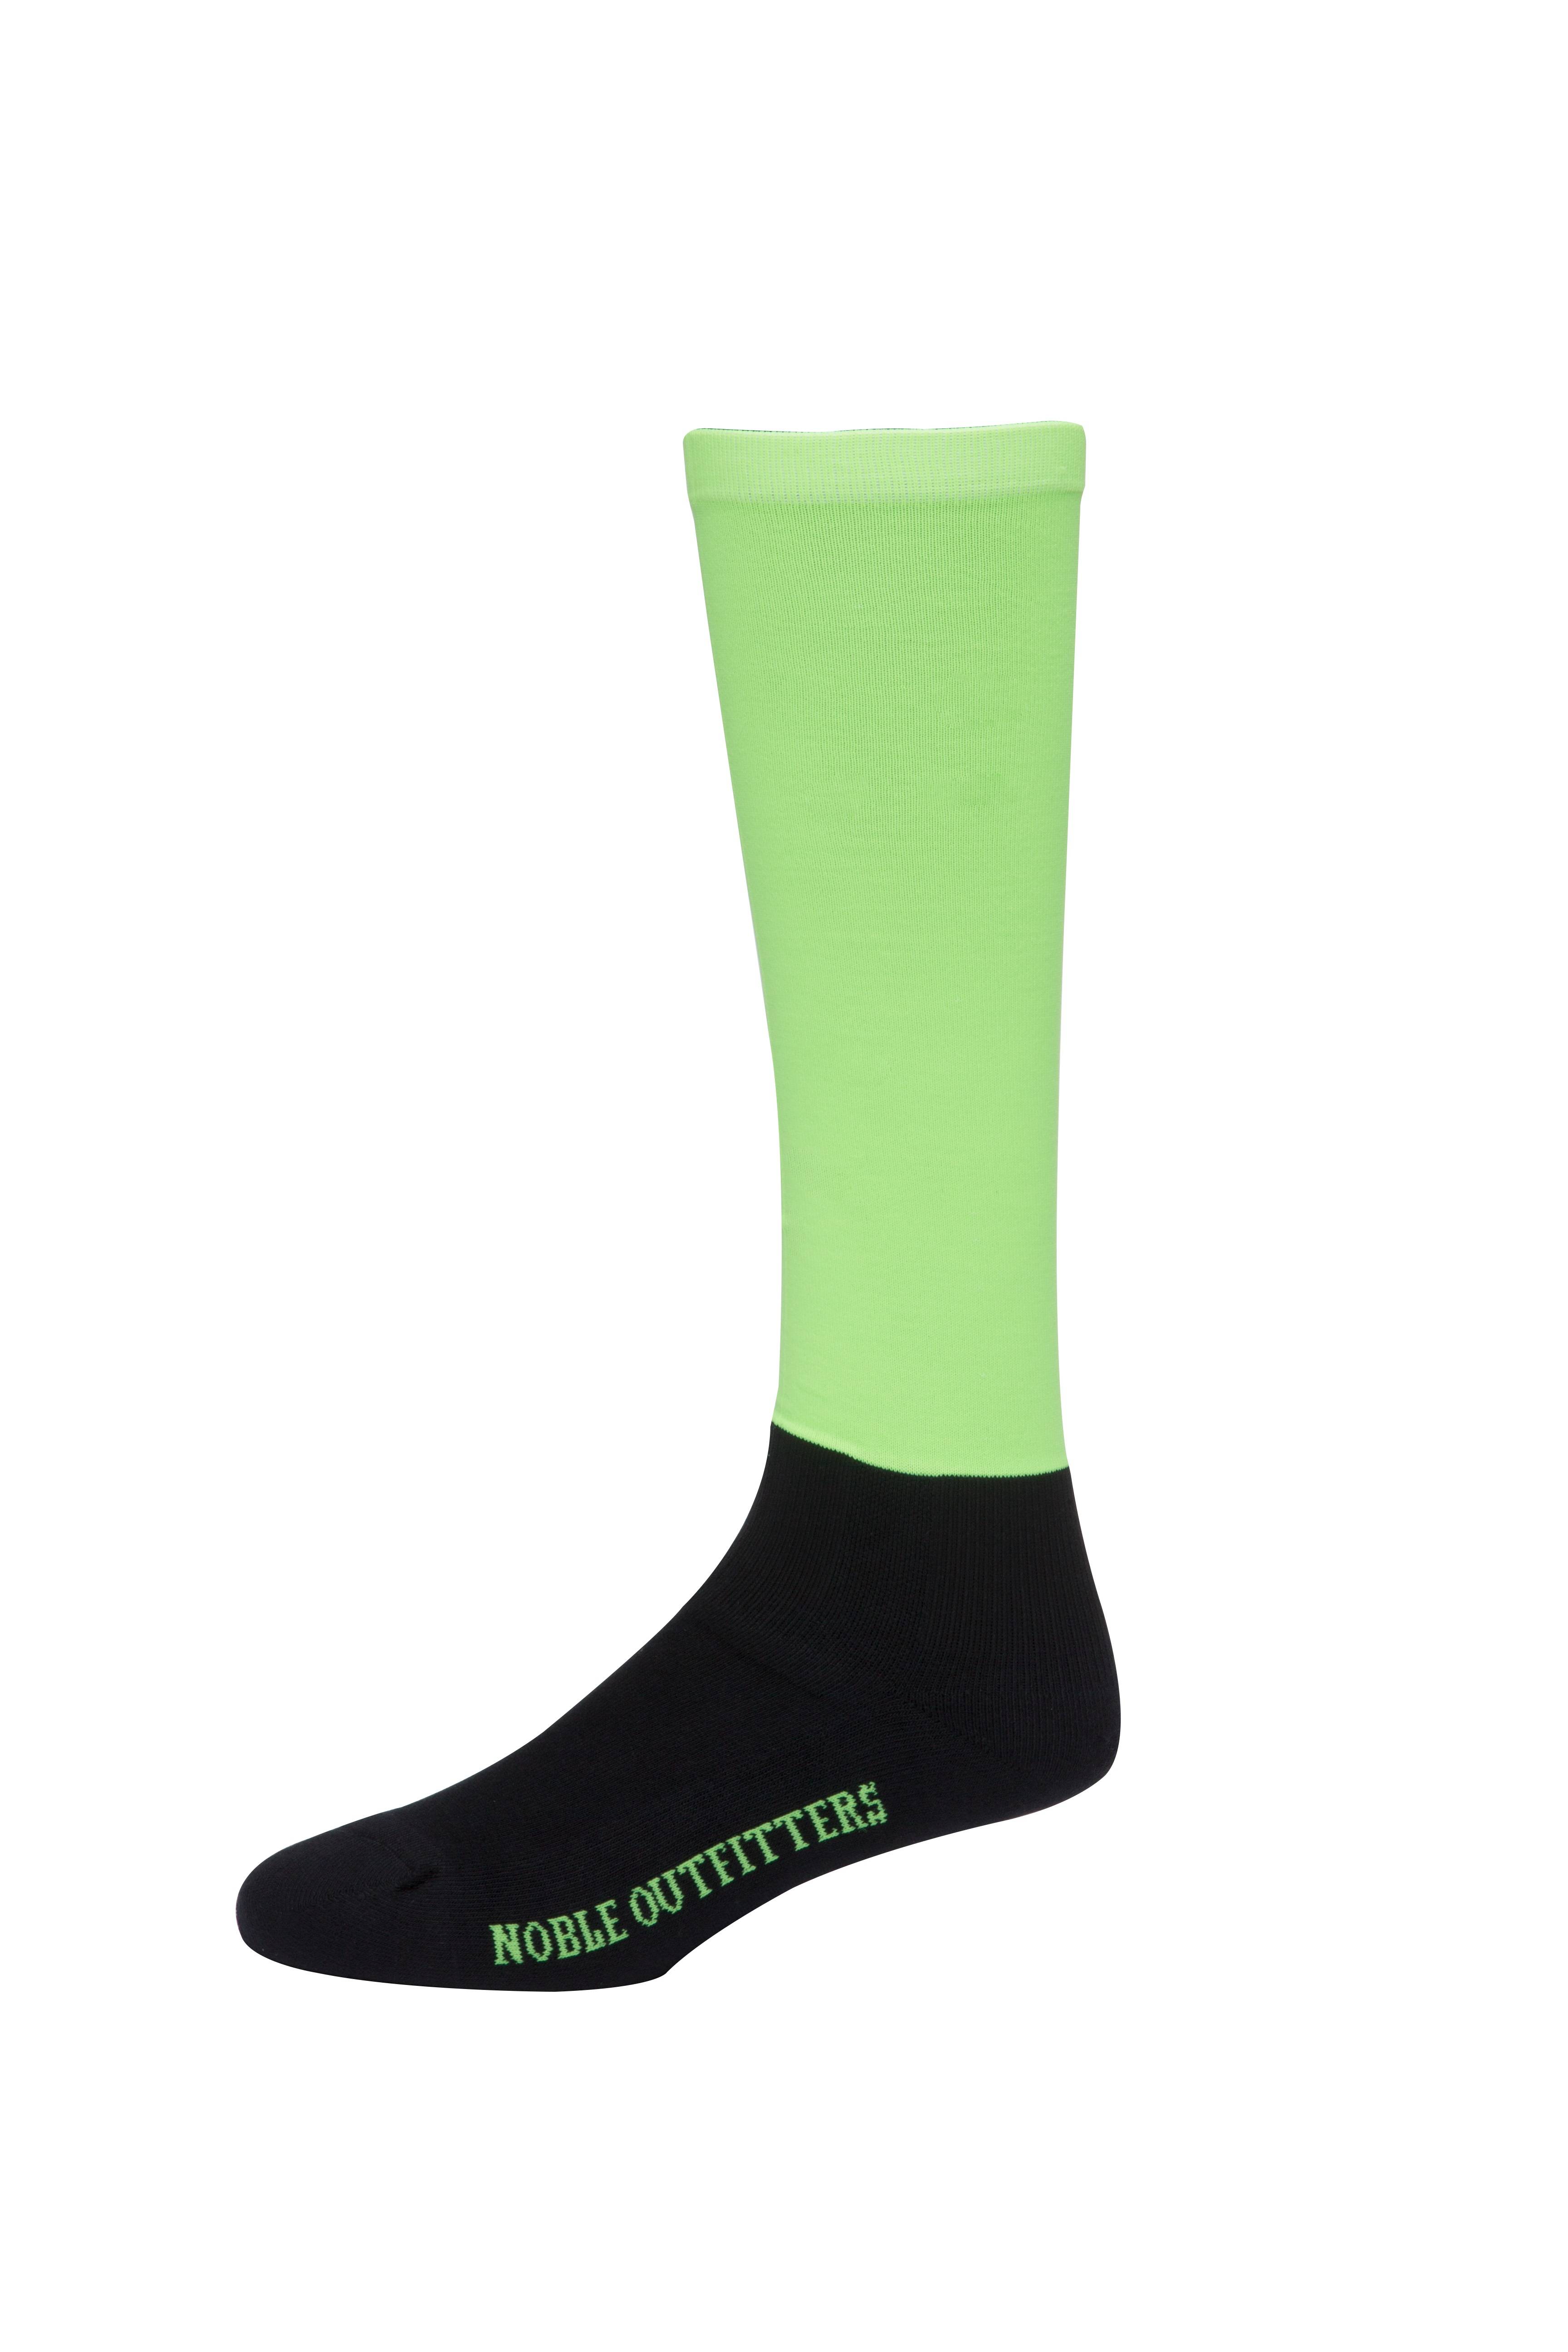 Competition Socks Noble Outfitters Over The Calf Peddies Caribbean Wave New